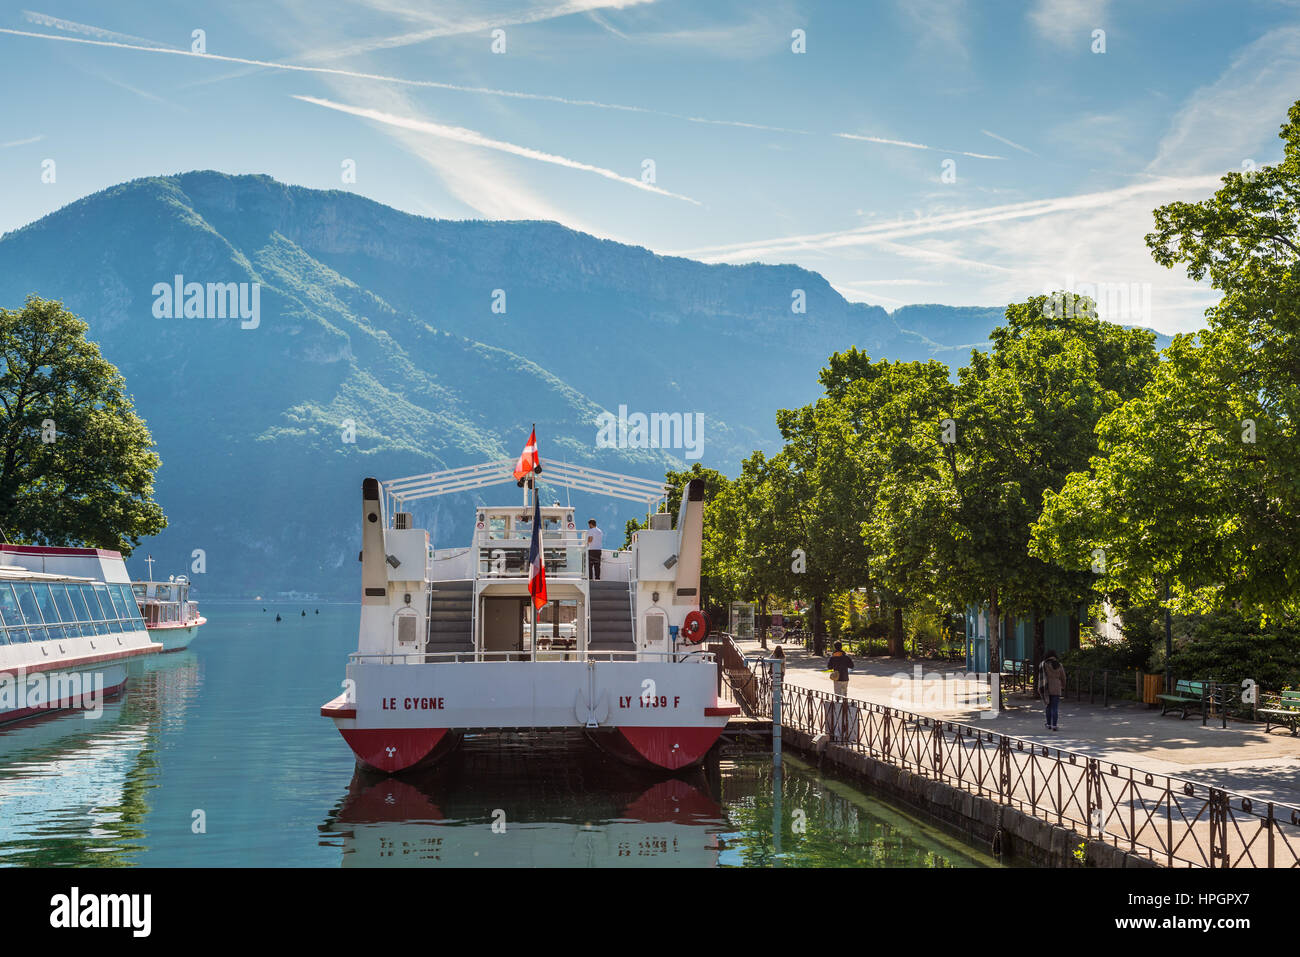 Annecy, France - May 25, 2016: Tourist excursion boats are moored at the pier seen during the spring sunny day in Annecy, Haute Savoie, French Alps, F Stock Photo